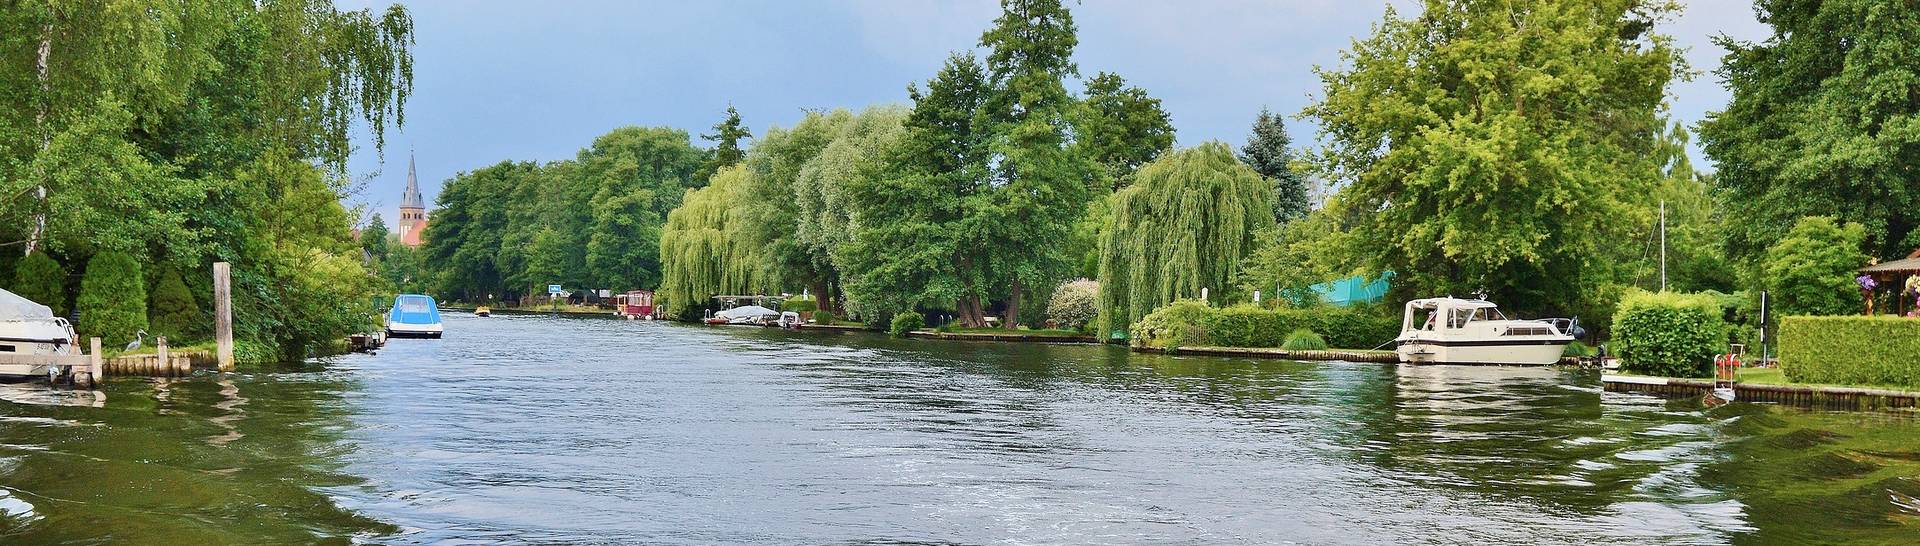 The Thames in Surrey